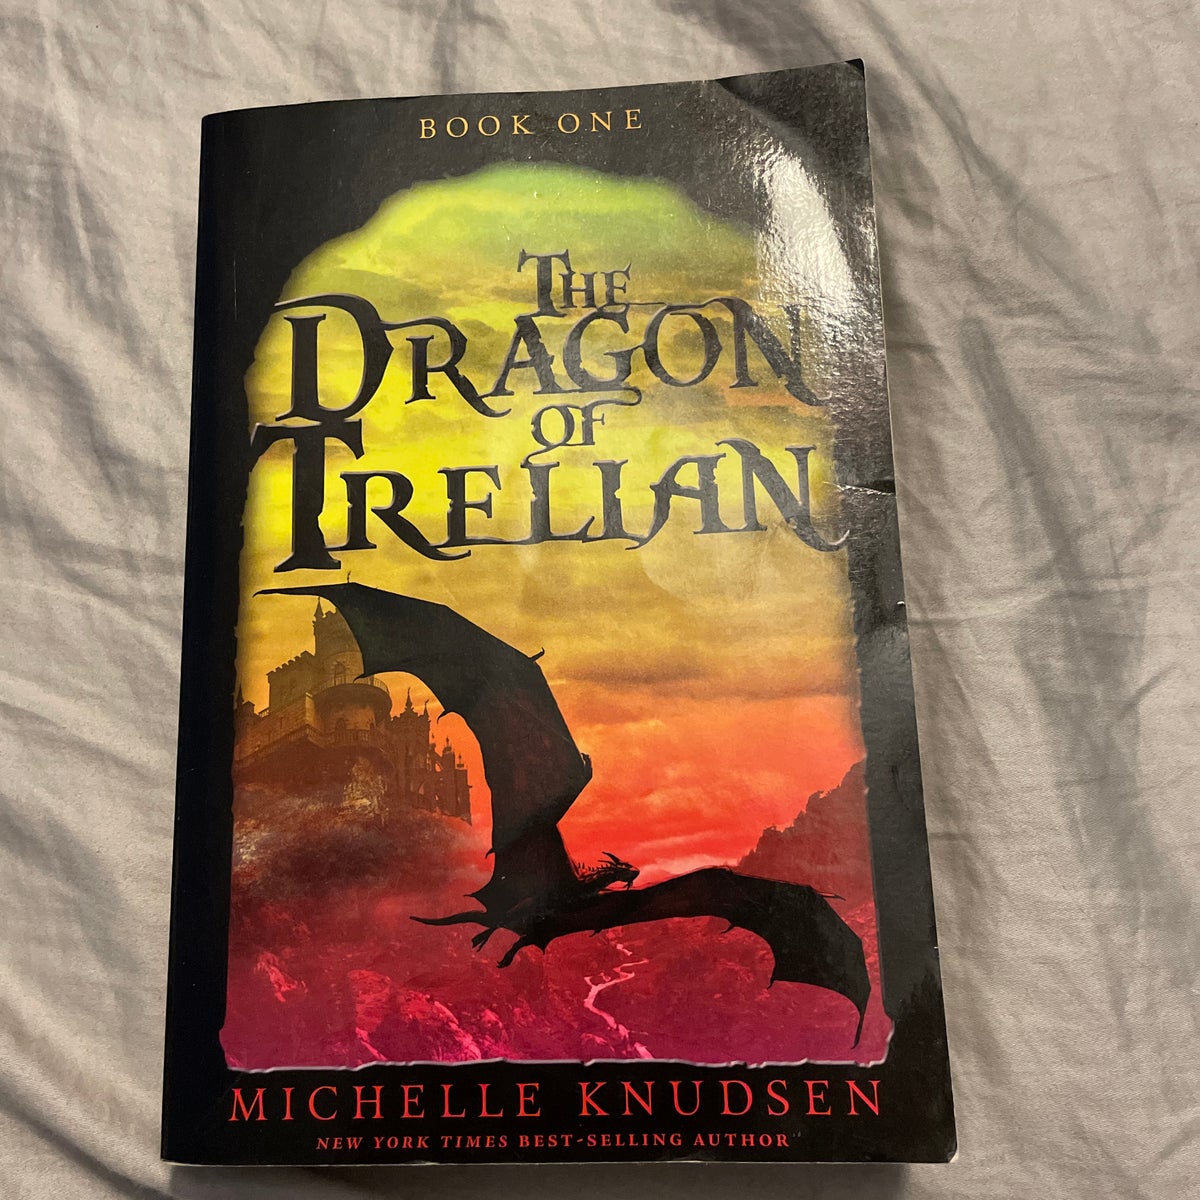 The Dragon of Trelian by Michelle Knudsen: 9780763694548 |  : Books